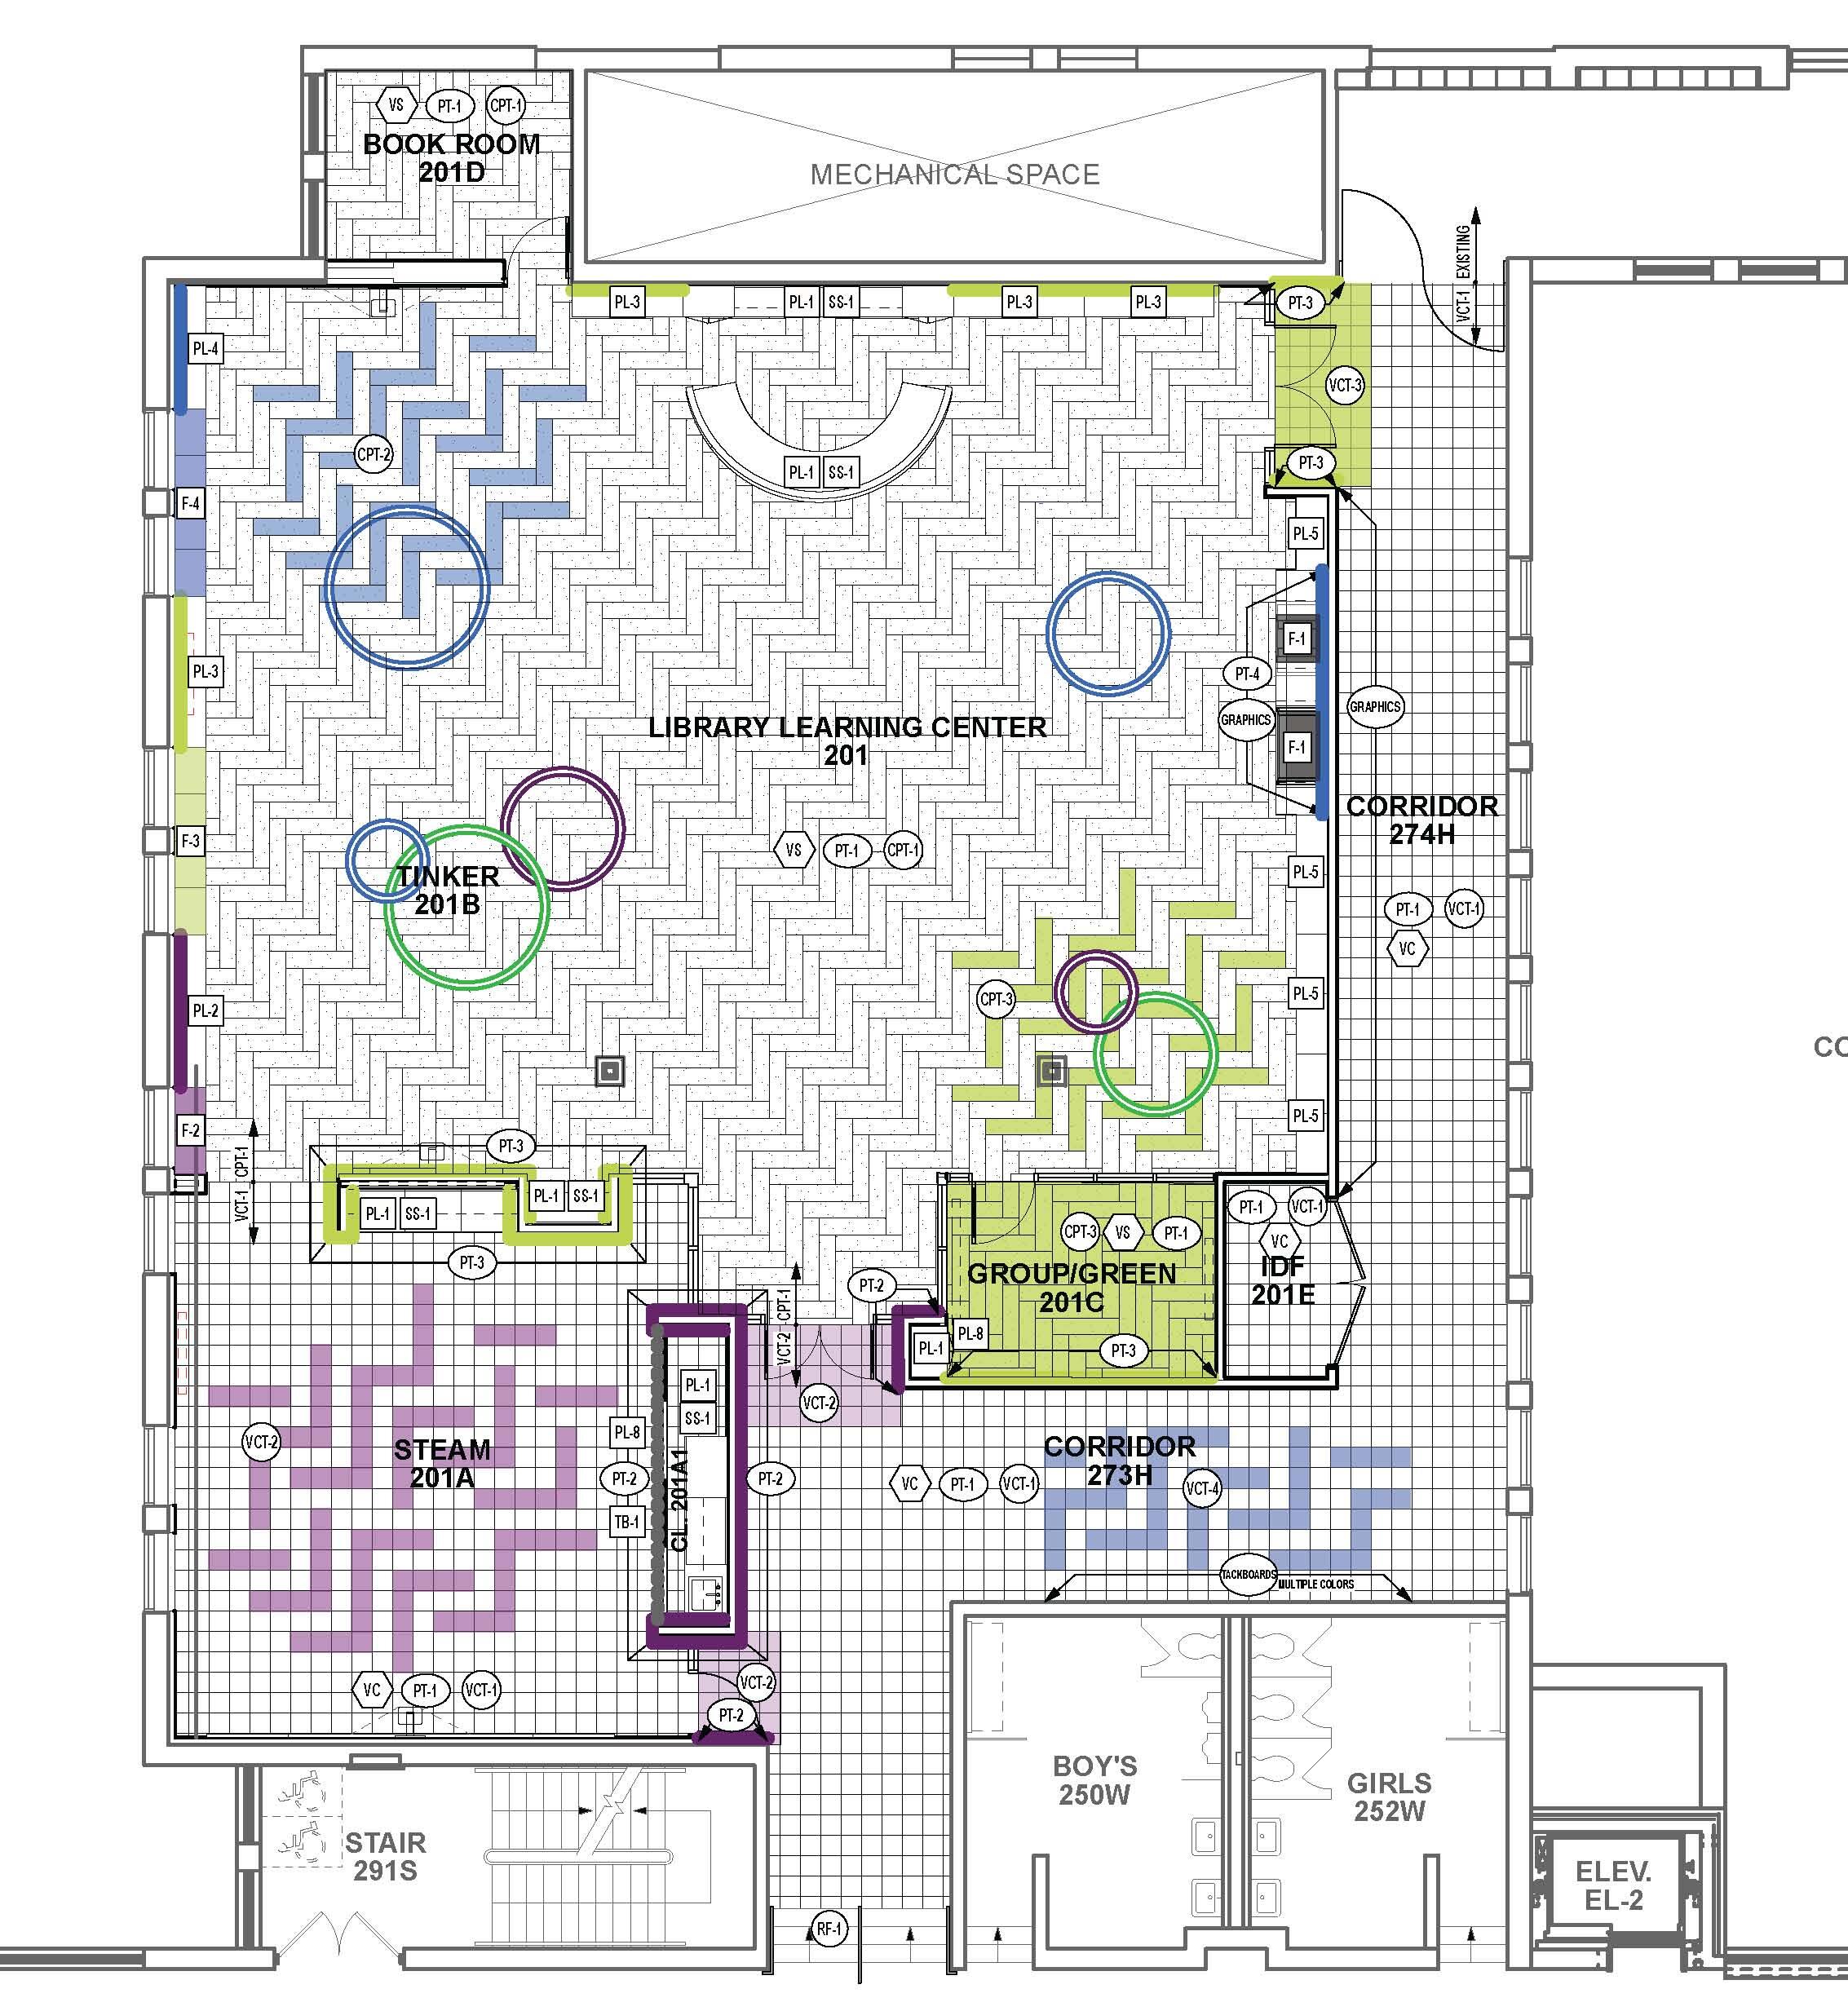 Photo: Floor plan for Summer 2021 construction improvements to Whittier library